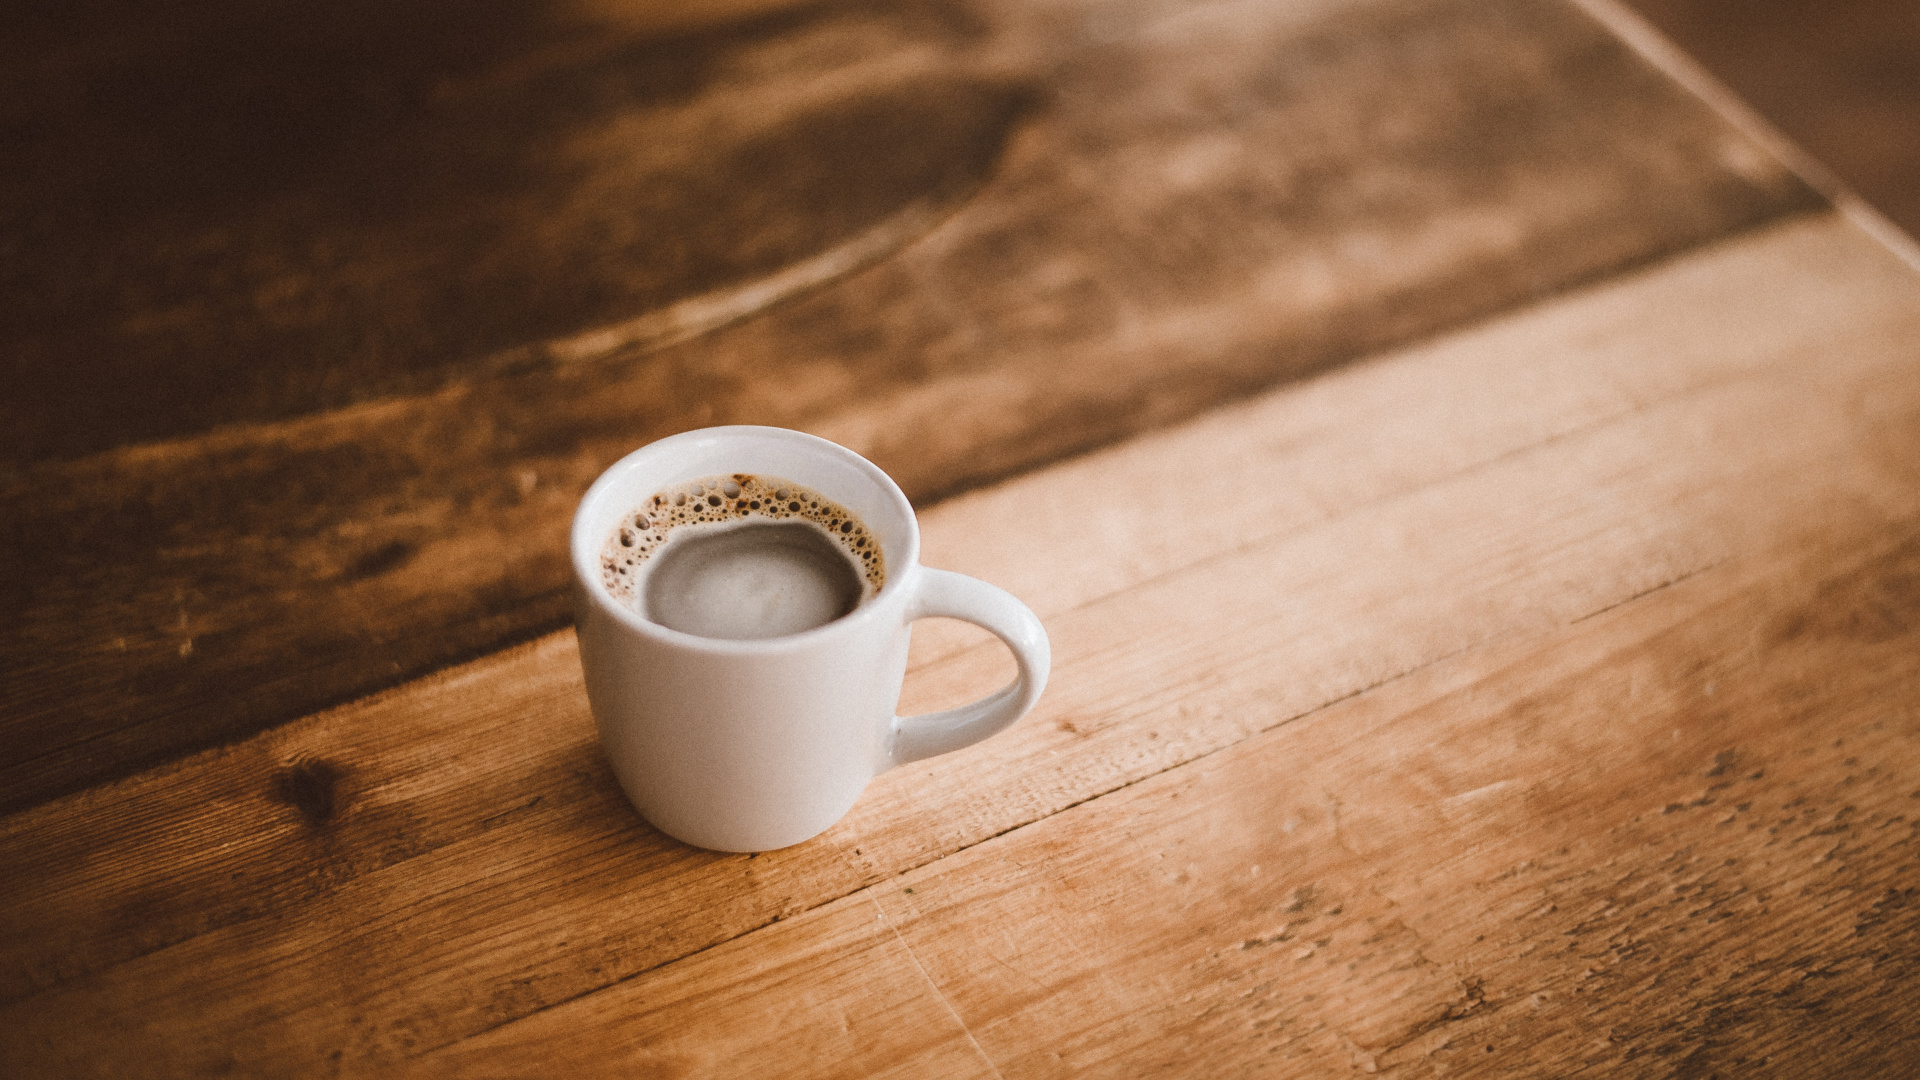 White Ceramic Mug on Brown Wooden Table. Wallpaper in 1920x1080 Resolution